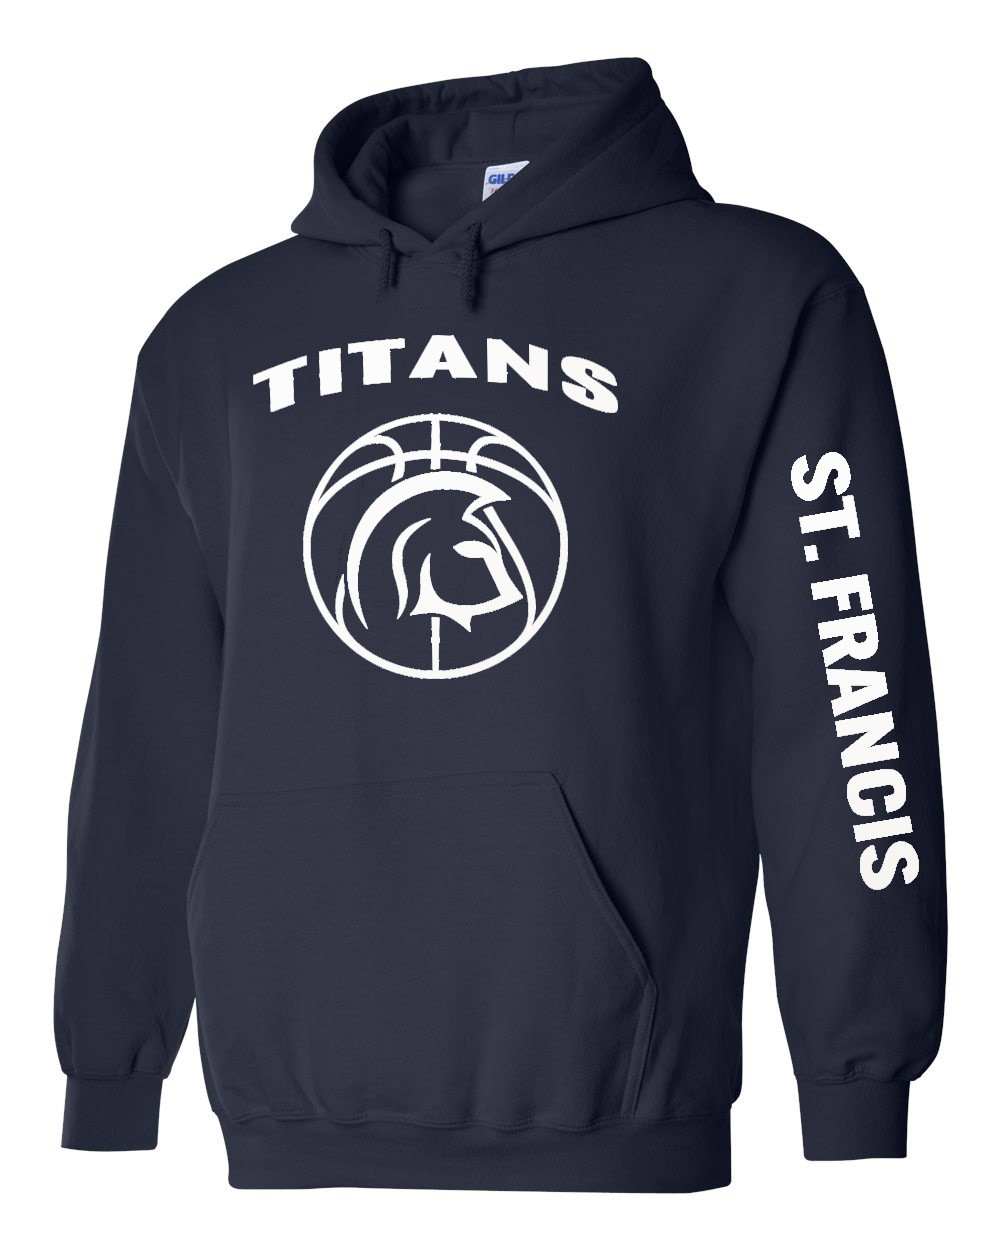 SFA Titan Pullover Hoodie w/ White Logo & Custom Name - Please Allow 2-3 Weeks For Delivery 